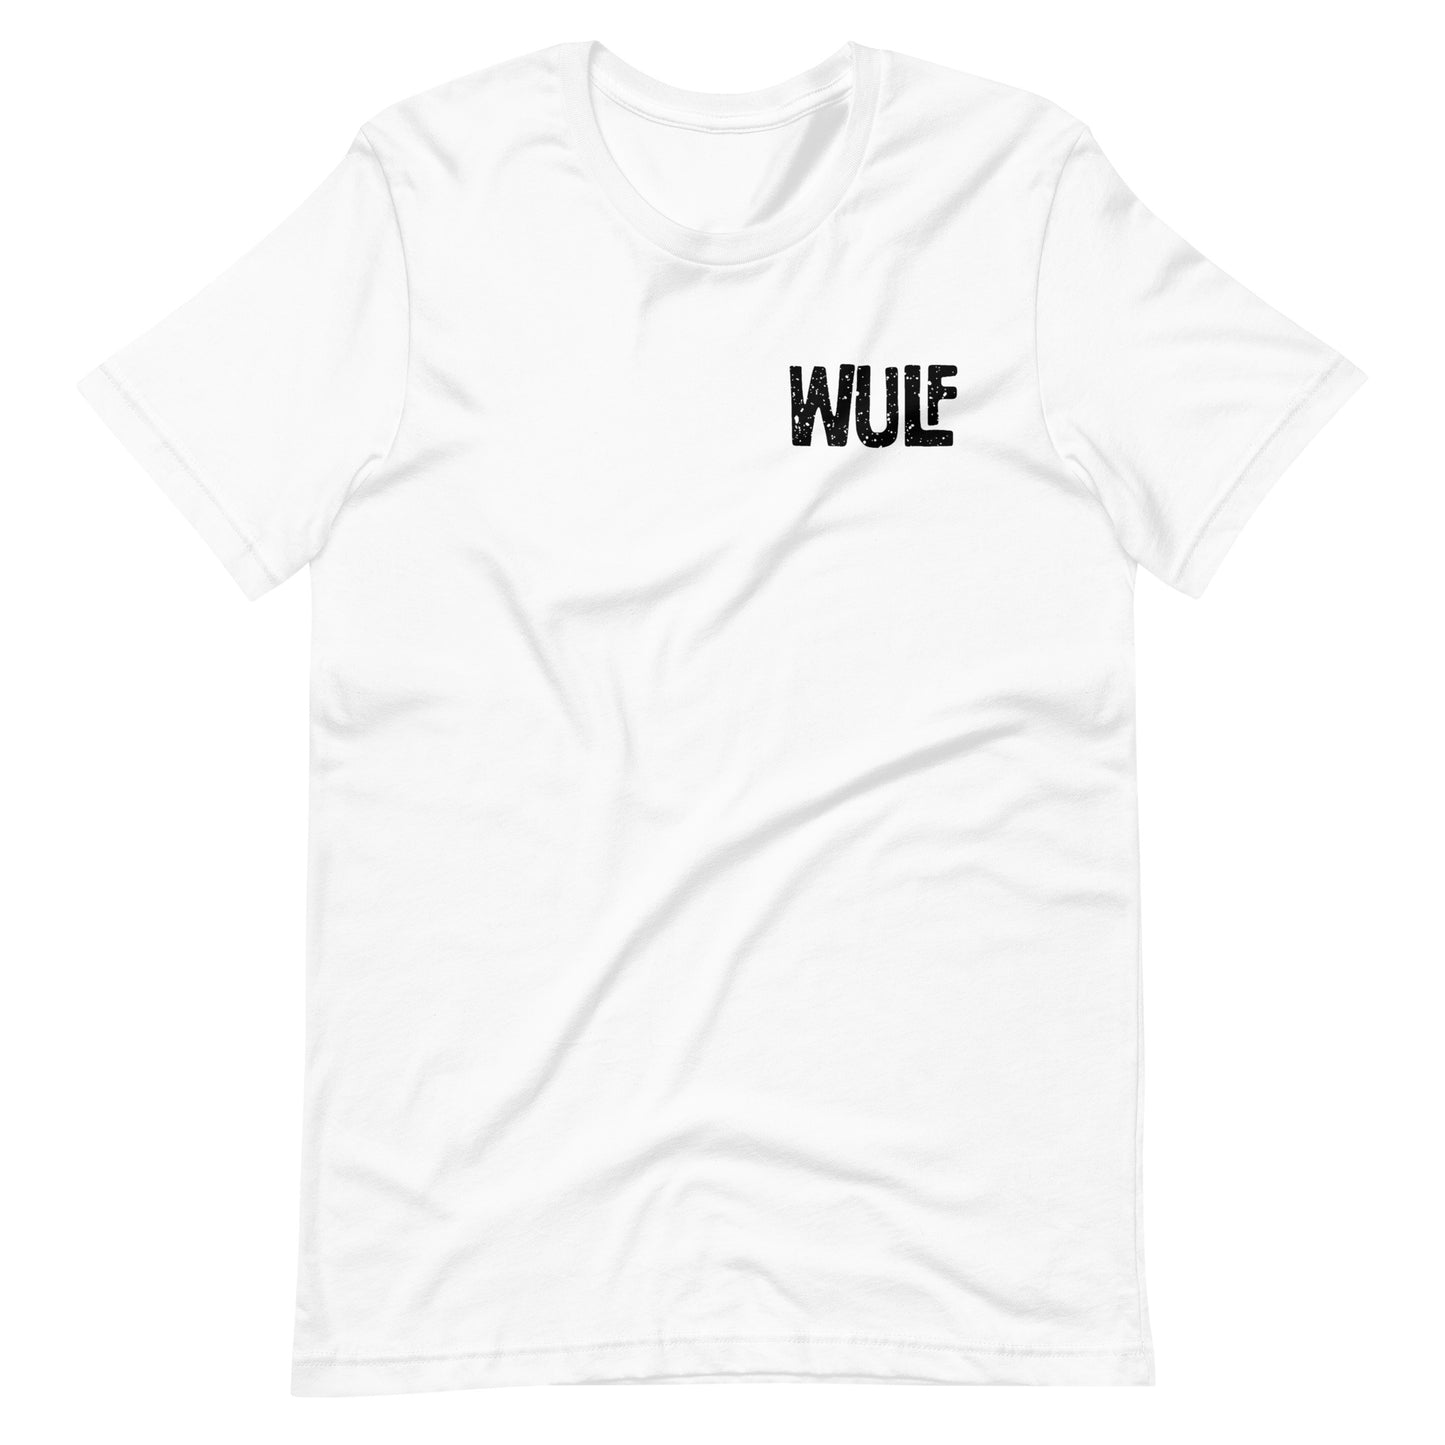 Wulf Clothing “Made in Bogalusa” Tee